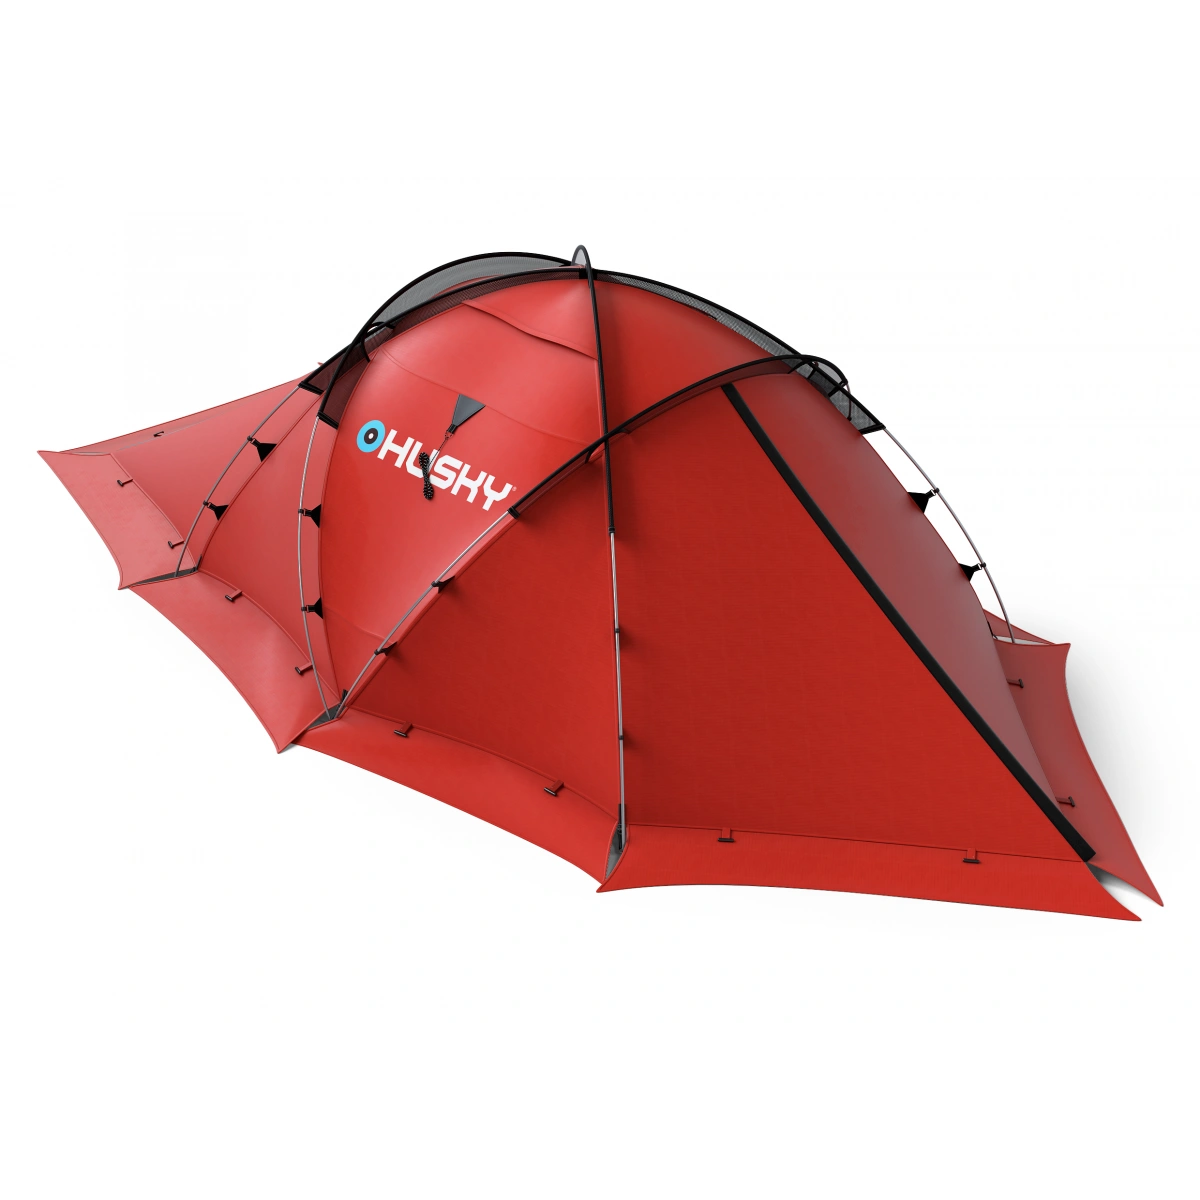 HUSKY Extreme Tent – Fighter 3-4